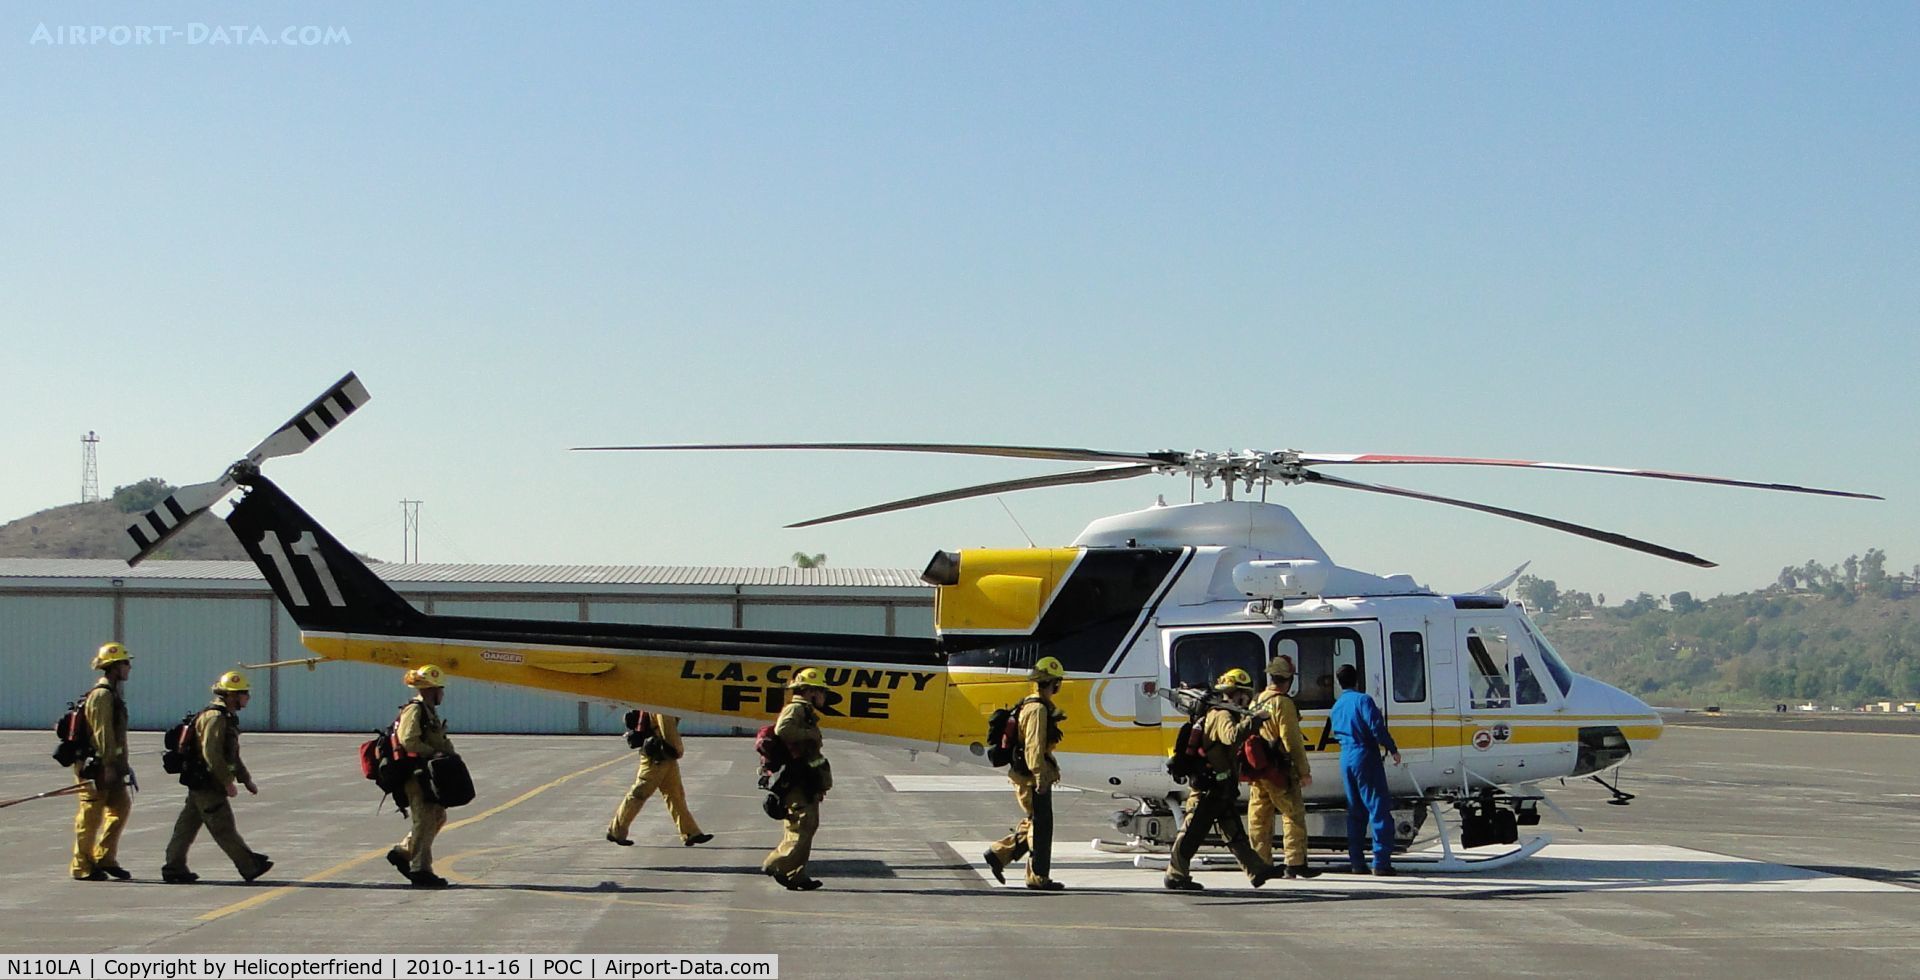 N110LA, 2005 Bell 412EP C/N 36392, Fire fighters being taken to ship for practice loading and unloading